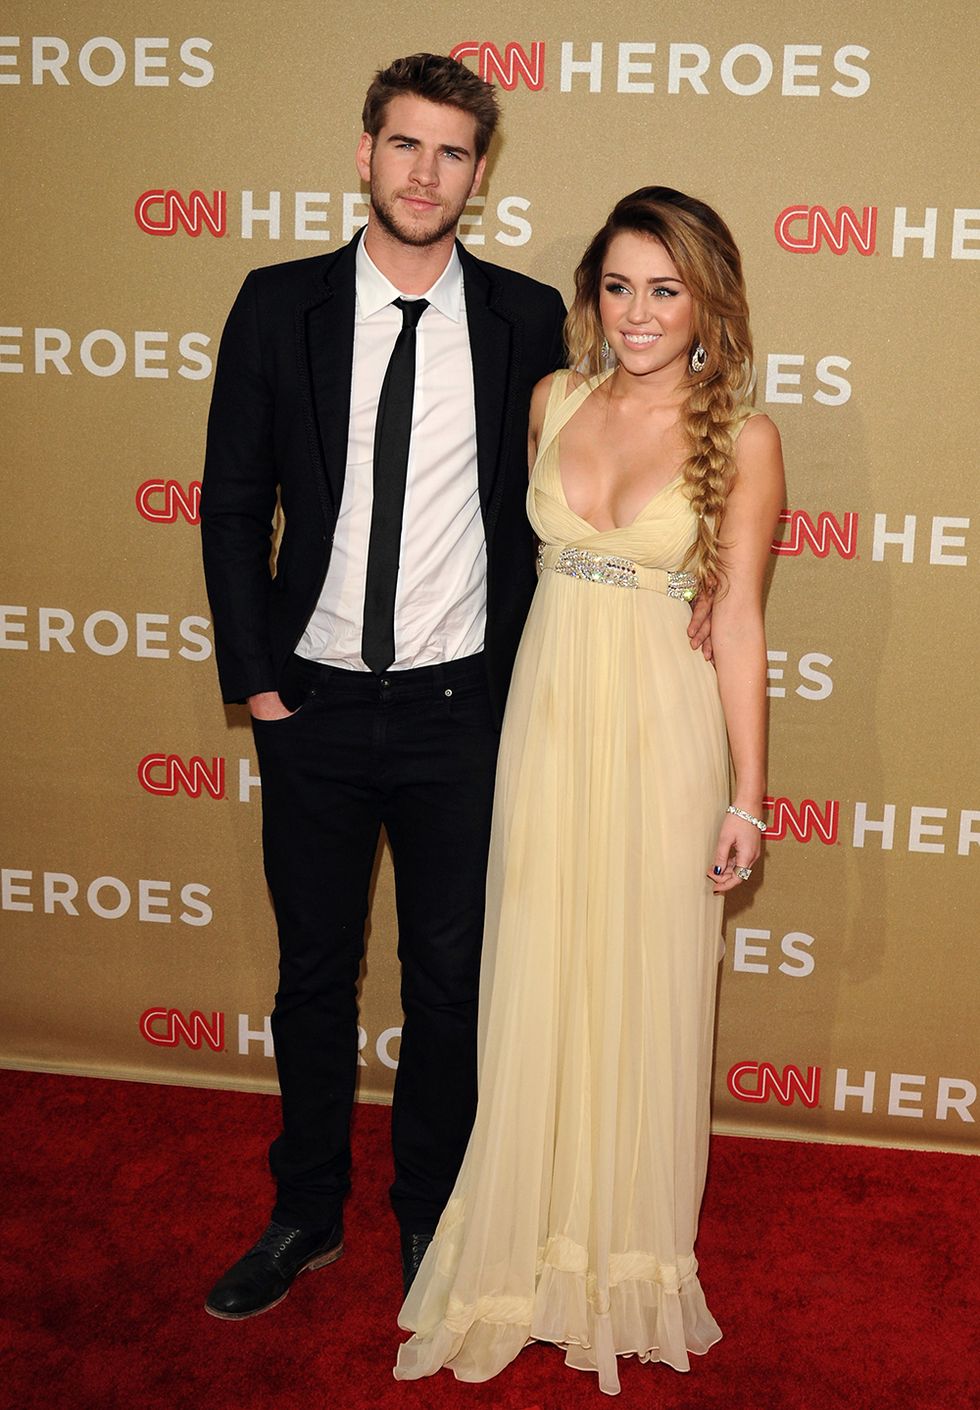 Miley Cyrus and Liam Hemsworth relationship timeline